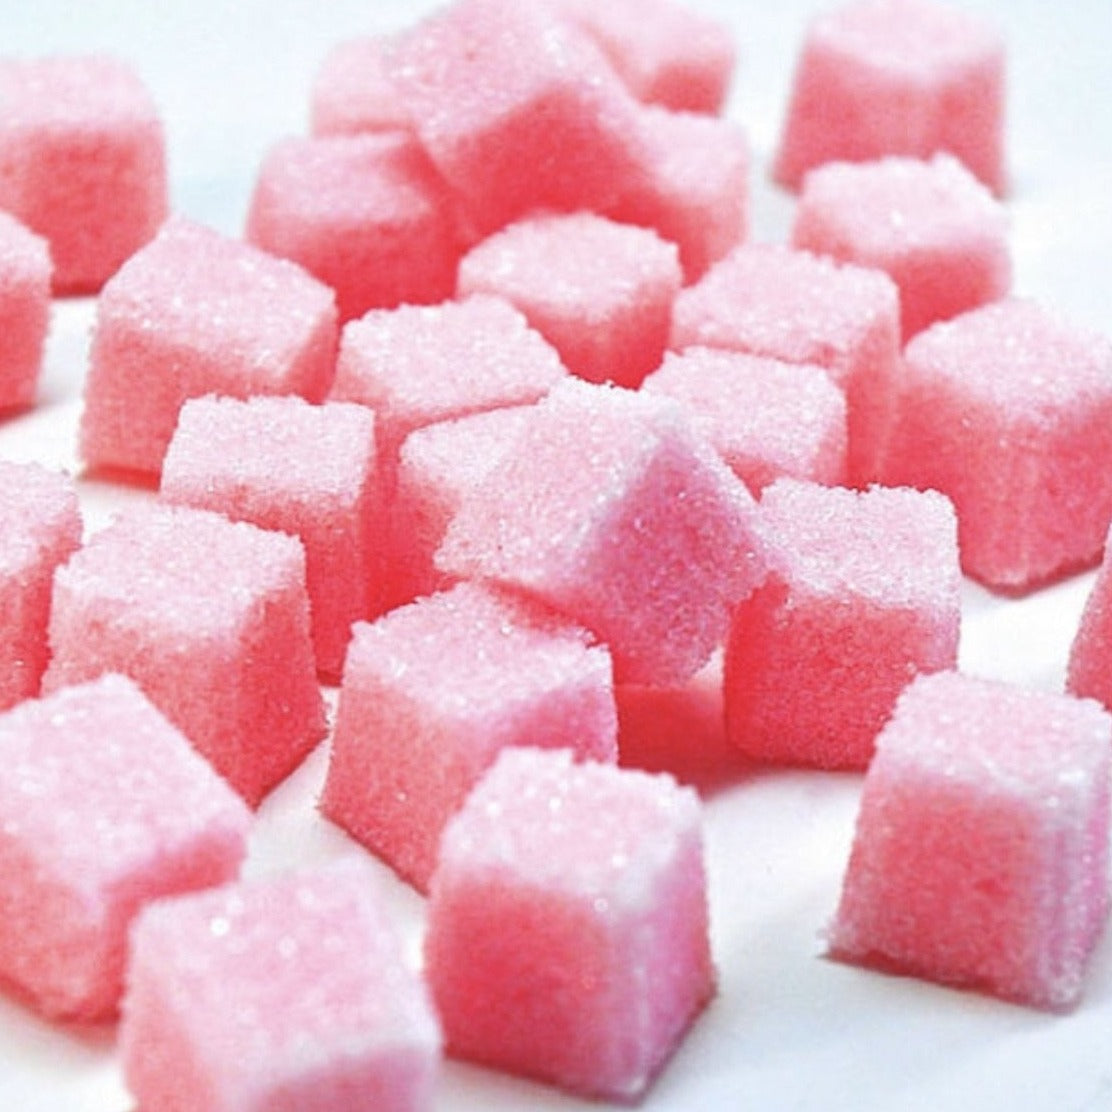 Pink Sugar Type Fragrance Oil at Aztec Candle & Soap Making Supplies: $2.94  - $2.94